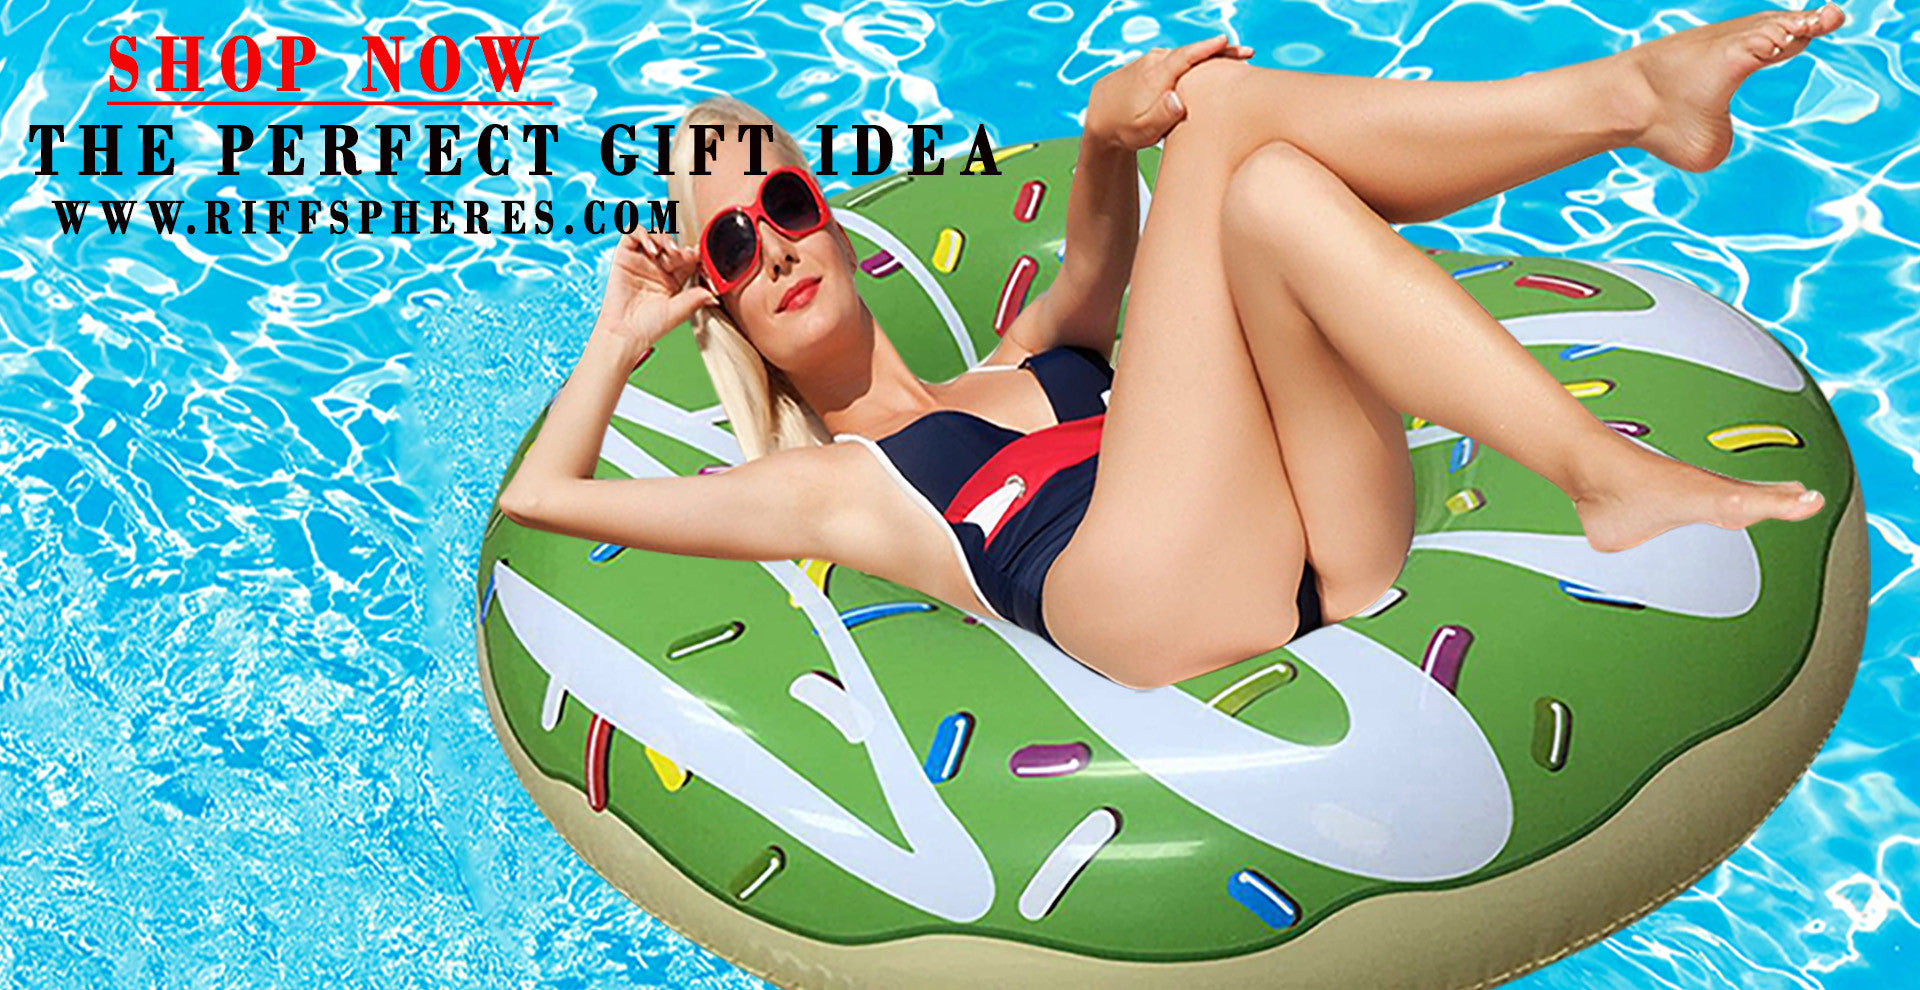 Inflatable Pool Floats